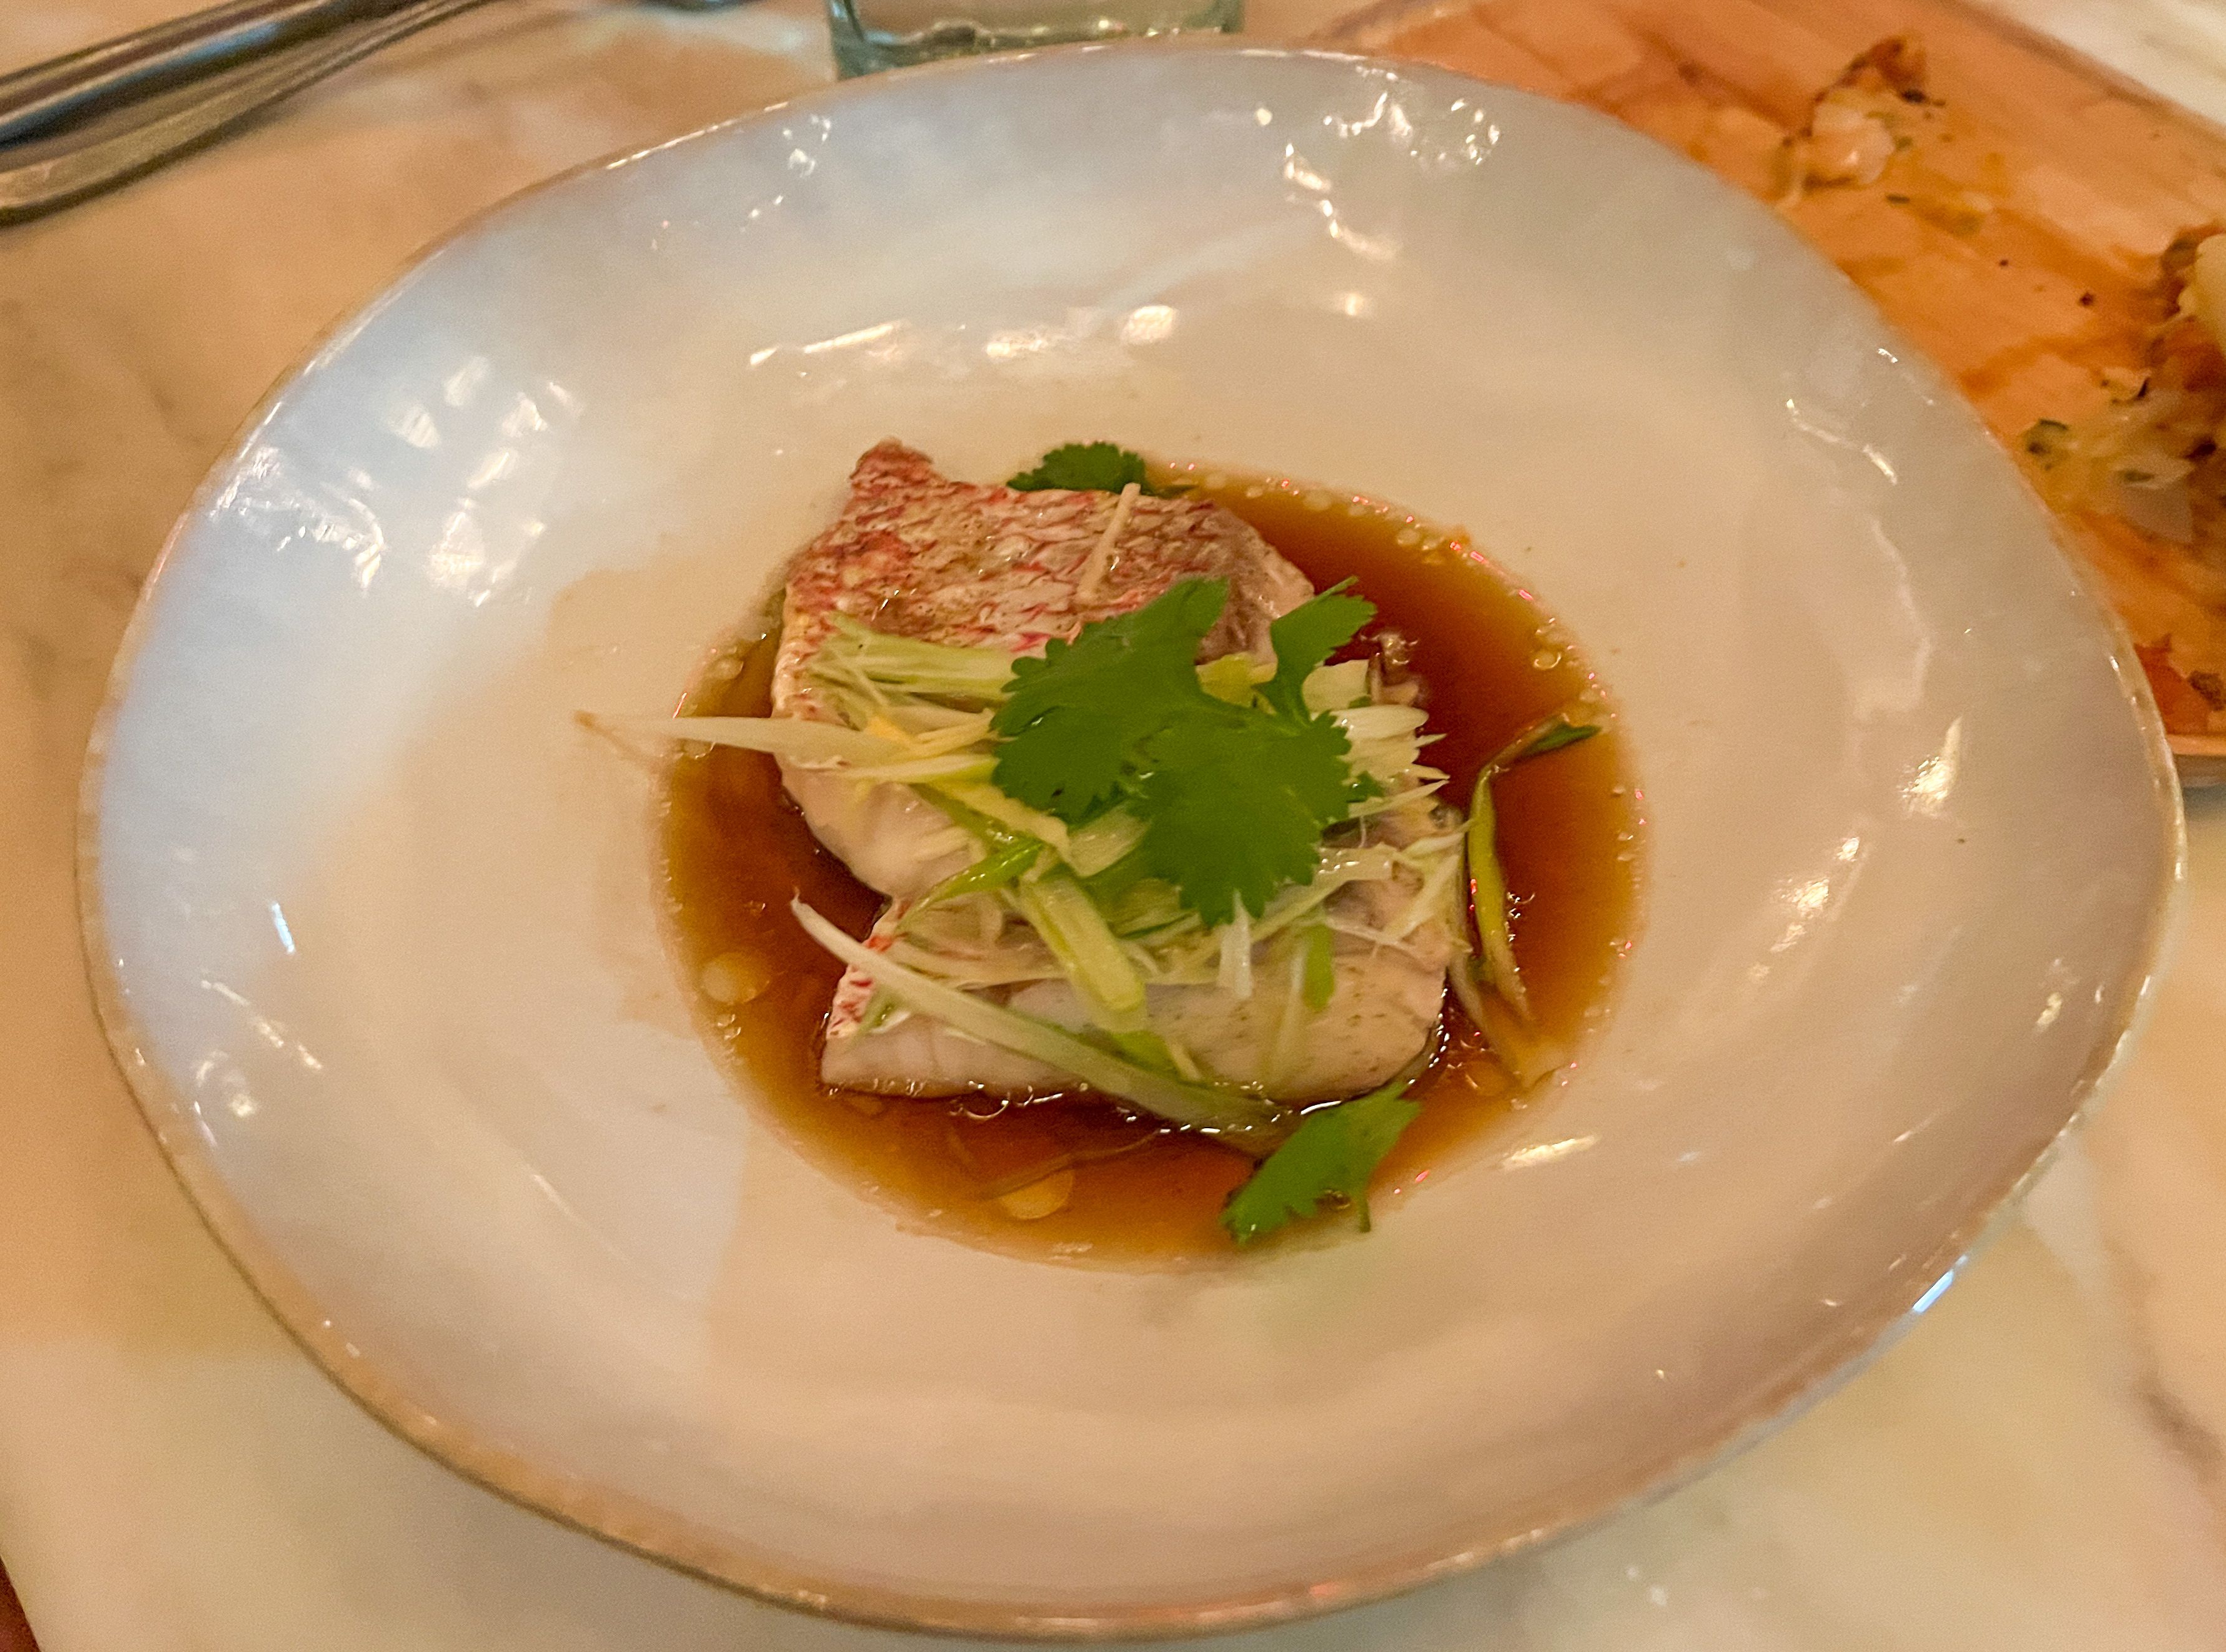 Steamed red snapper served on a white plate.